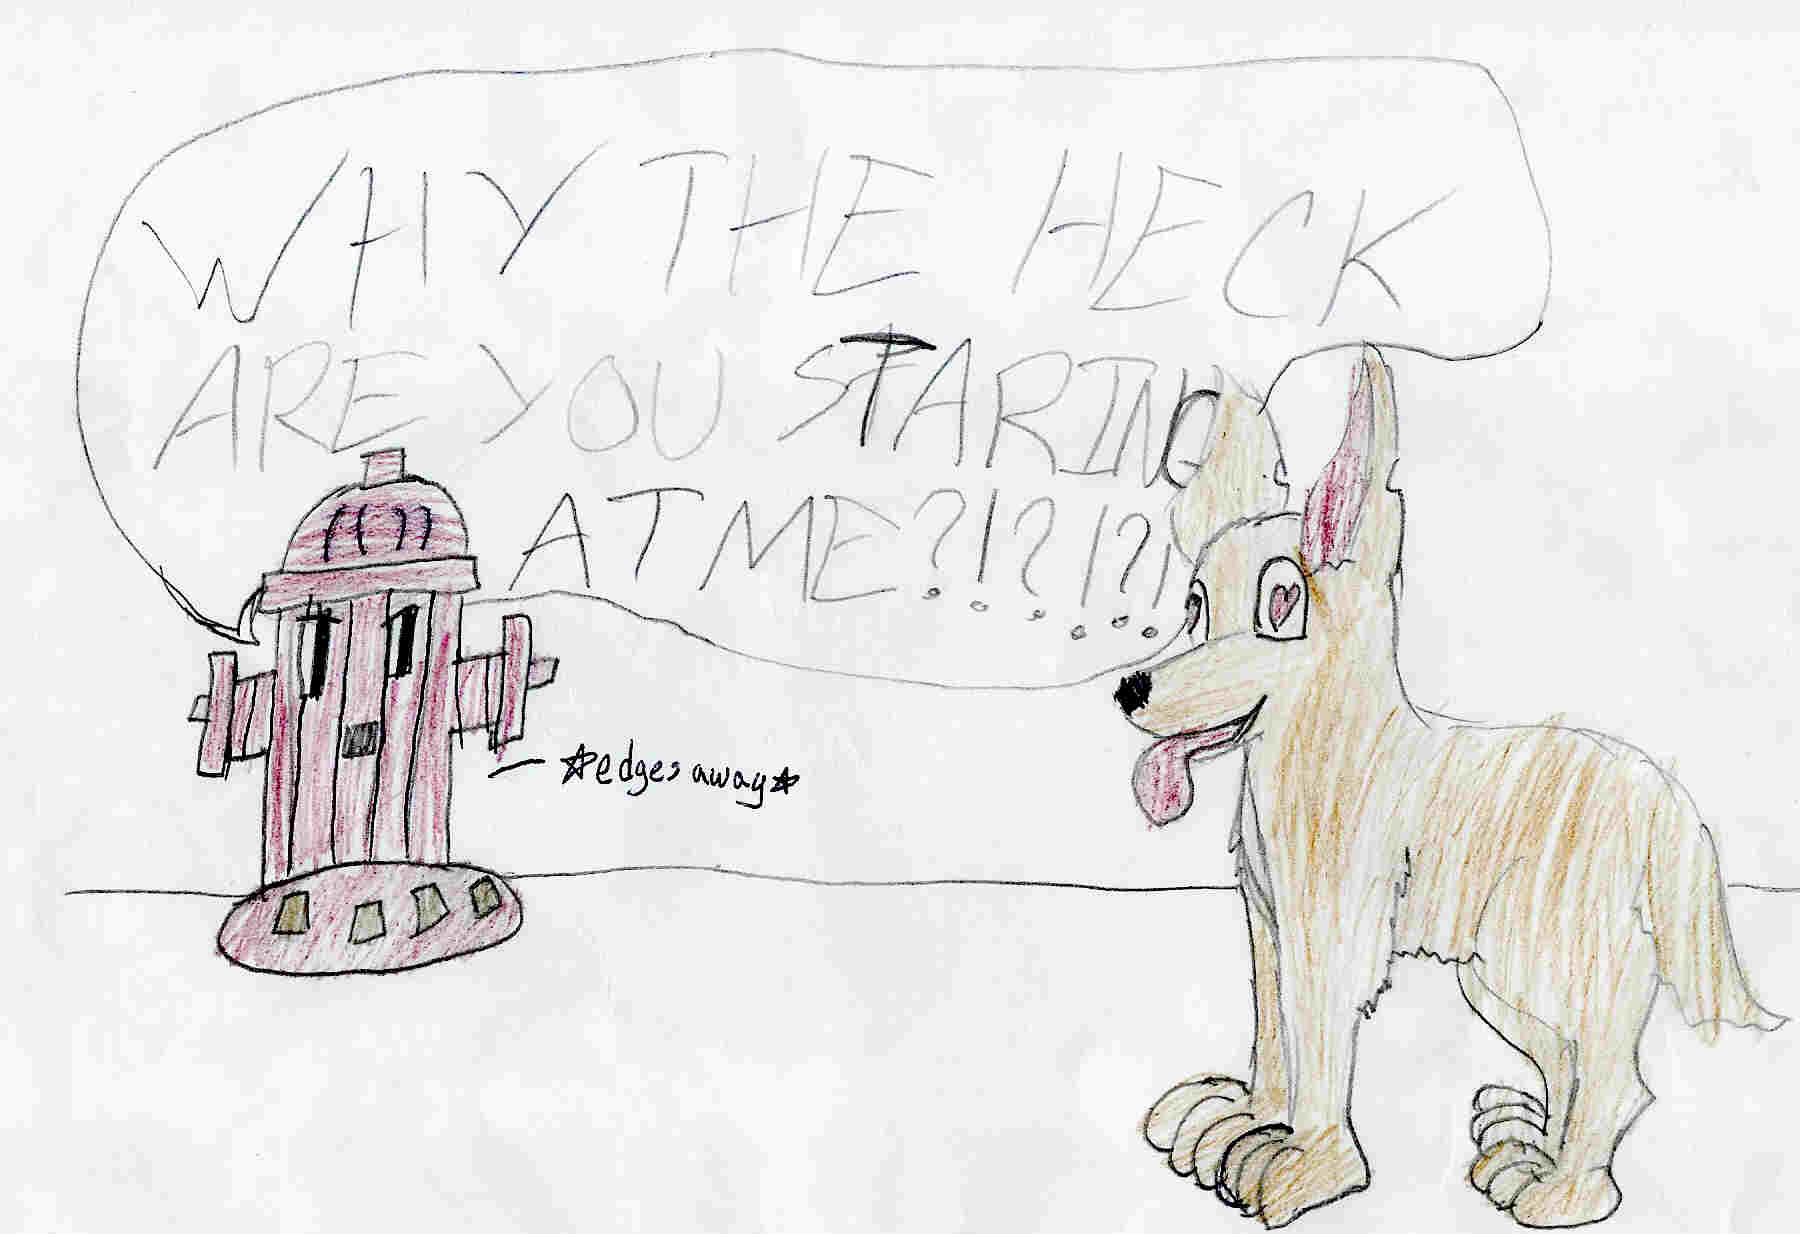 Dog And a Fire Hydrant by You-were-my-reason-for-living